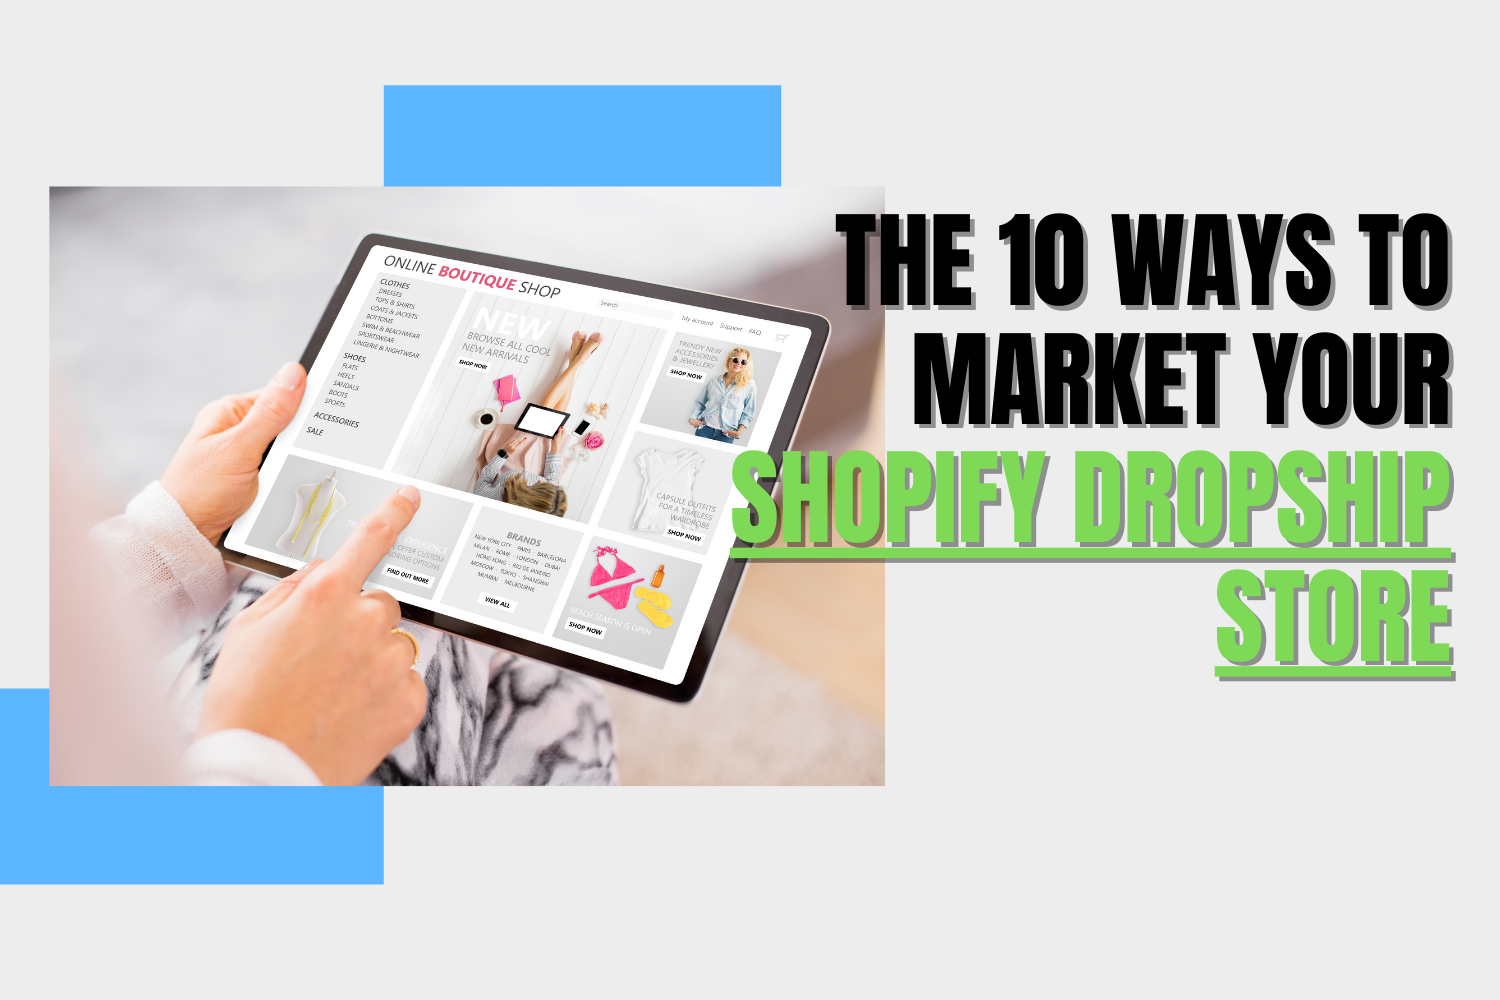 The 10 Ways to Market Your Shopify Dropship Store